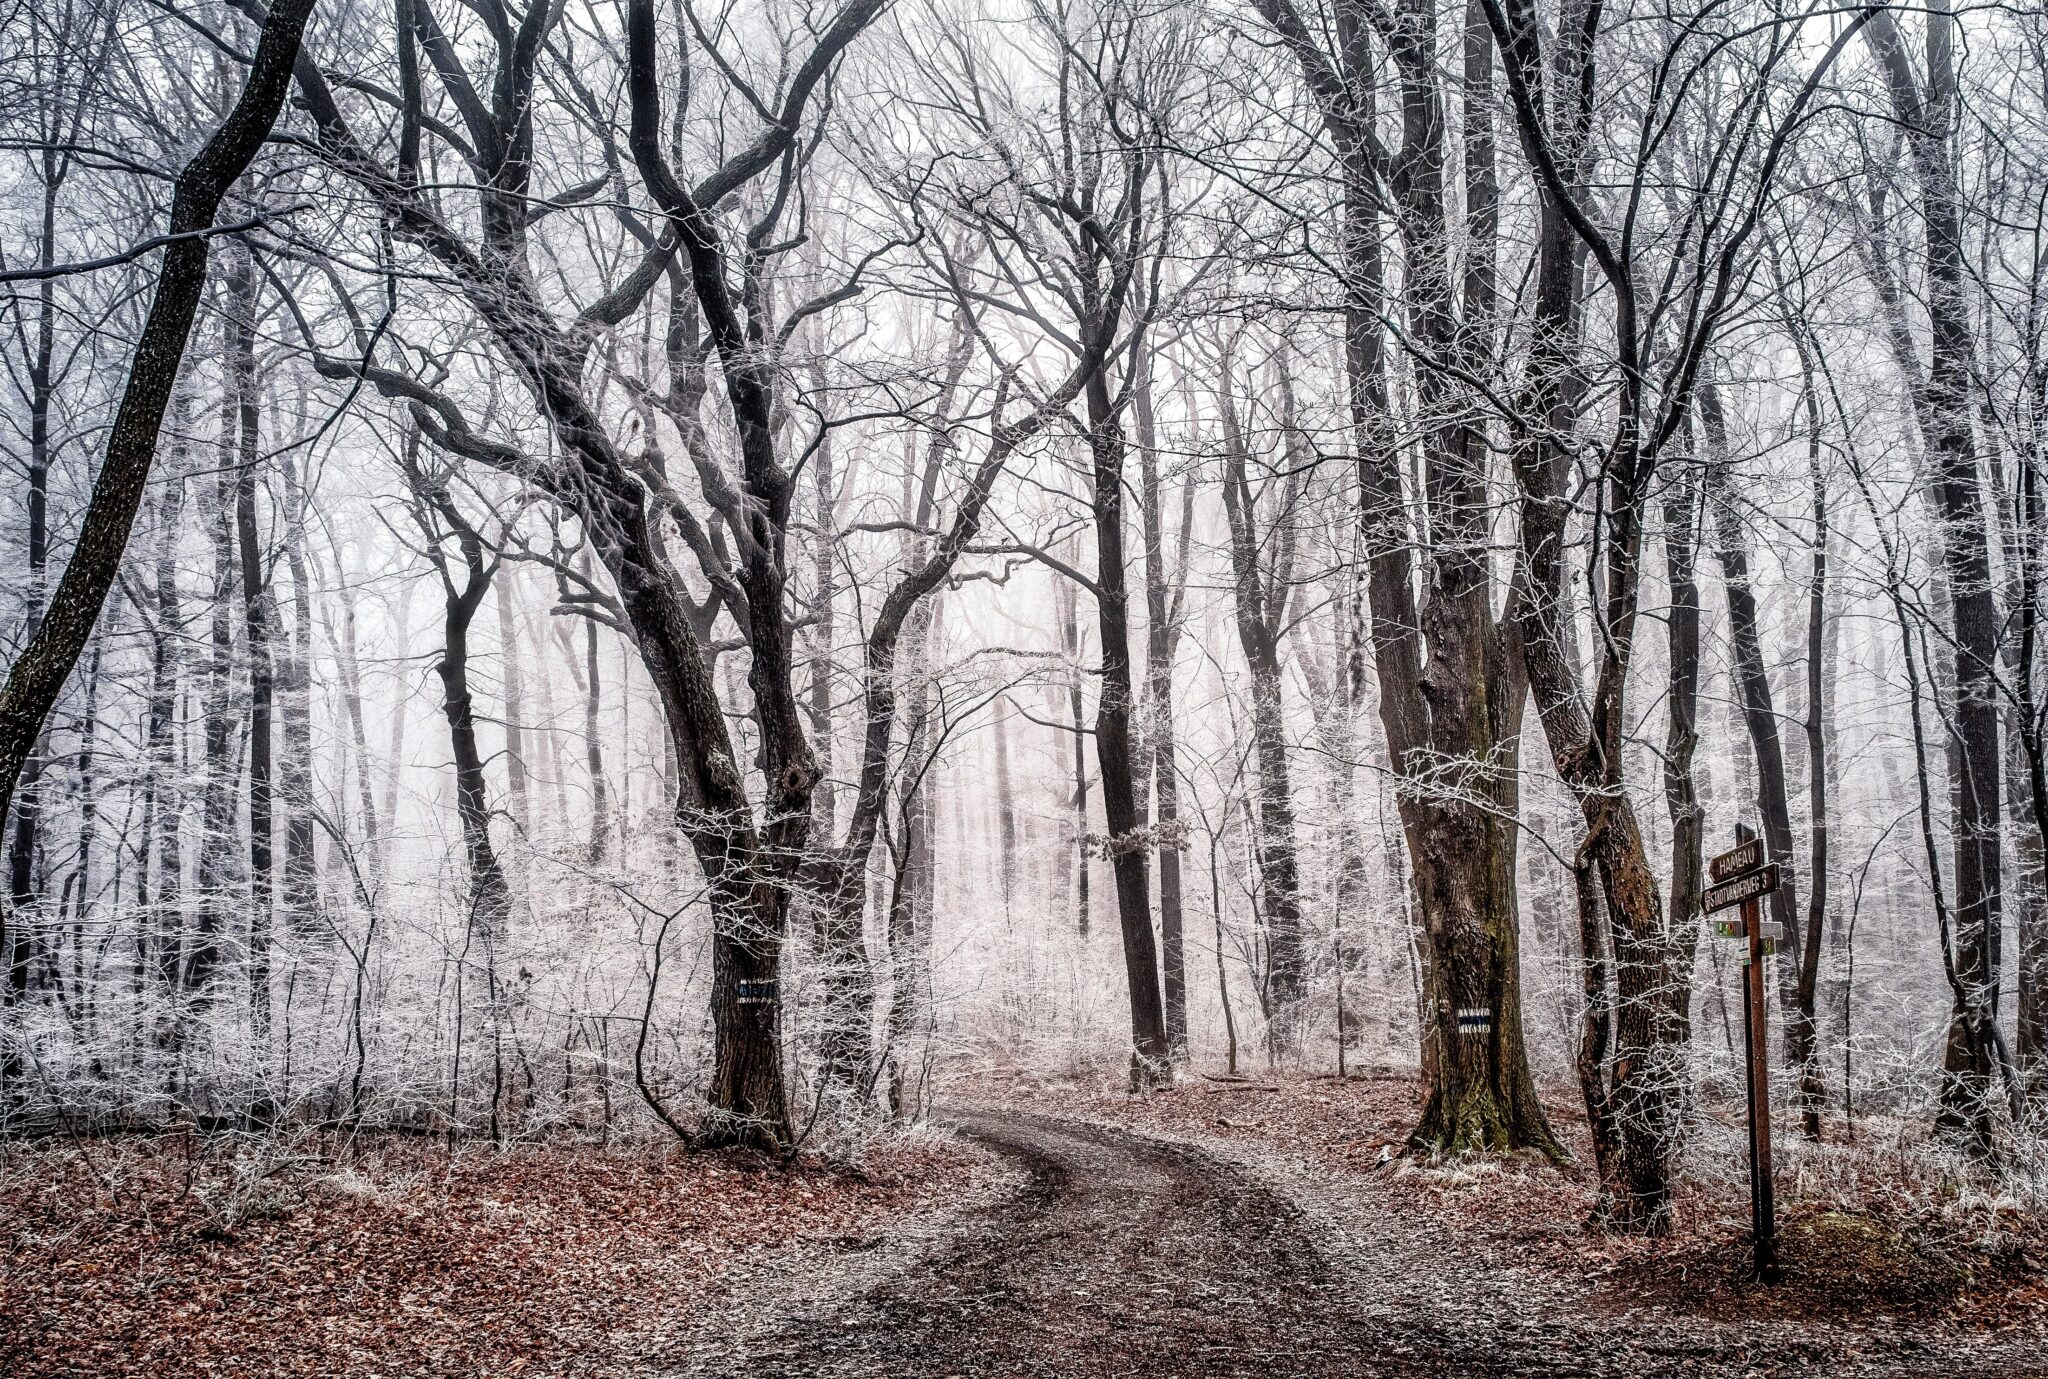 Path in a winter woods | Photo by Simon Berger on Unsplash